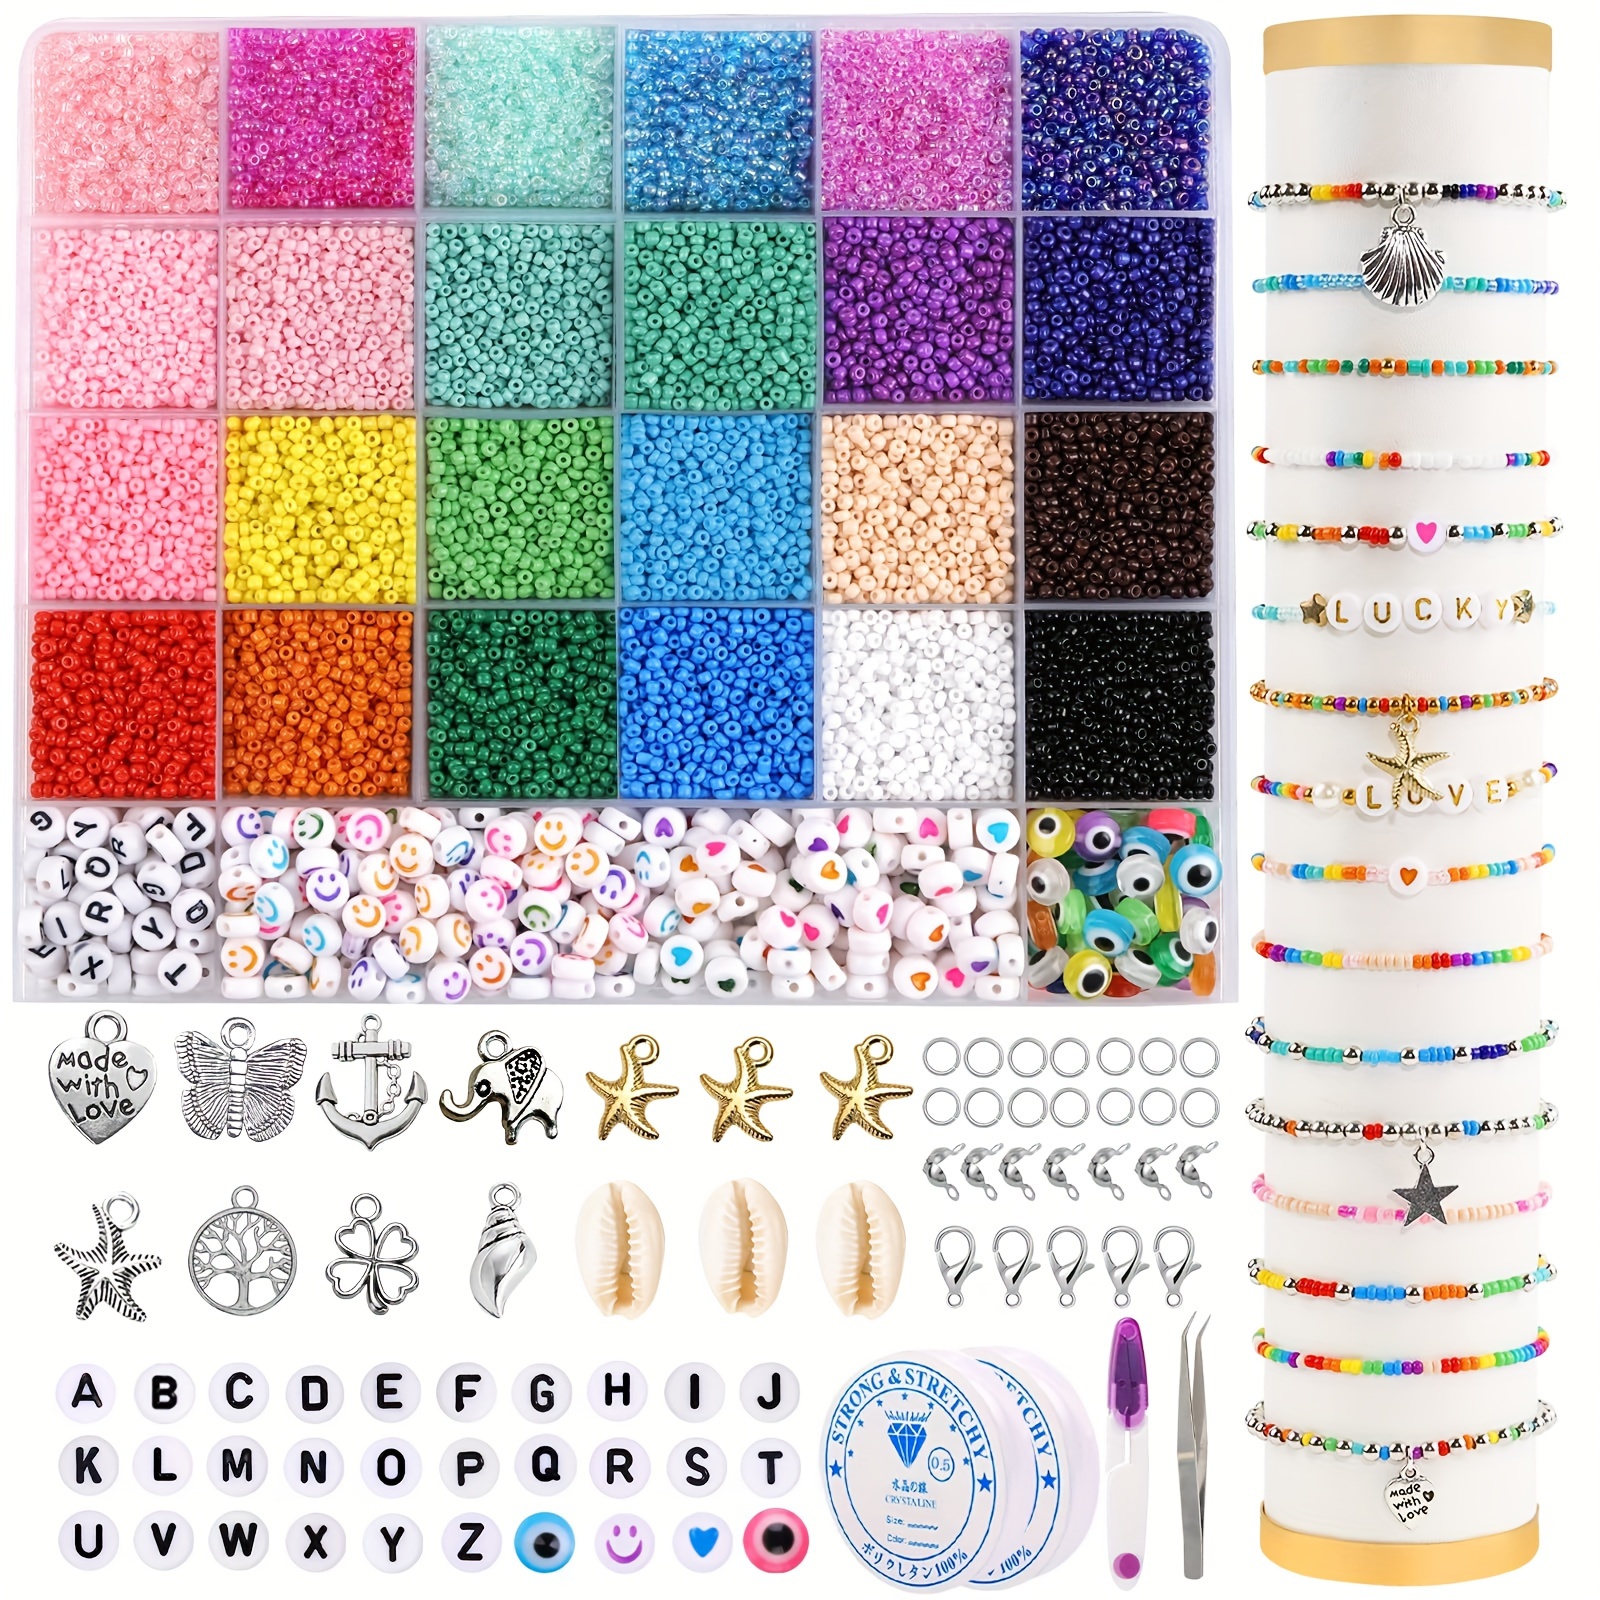 

8000pcs 24 Colors 2mm Small Glass Seed Beads Tiny Waist Beads For Jewelry Making Diy Friendship Necklace Bracelet Making Kit Daily Use Craft Supplies